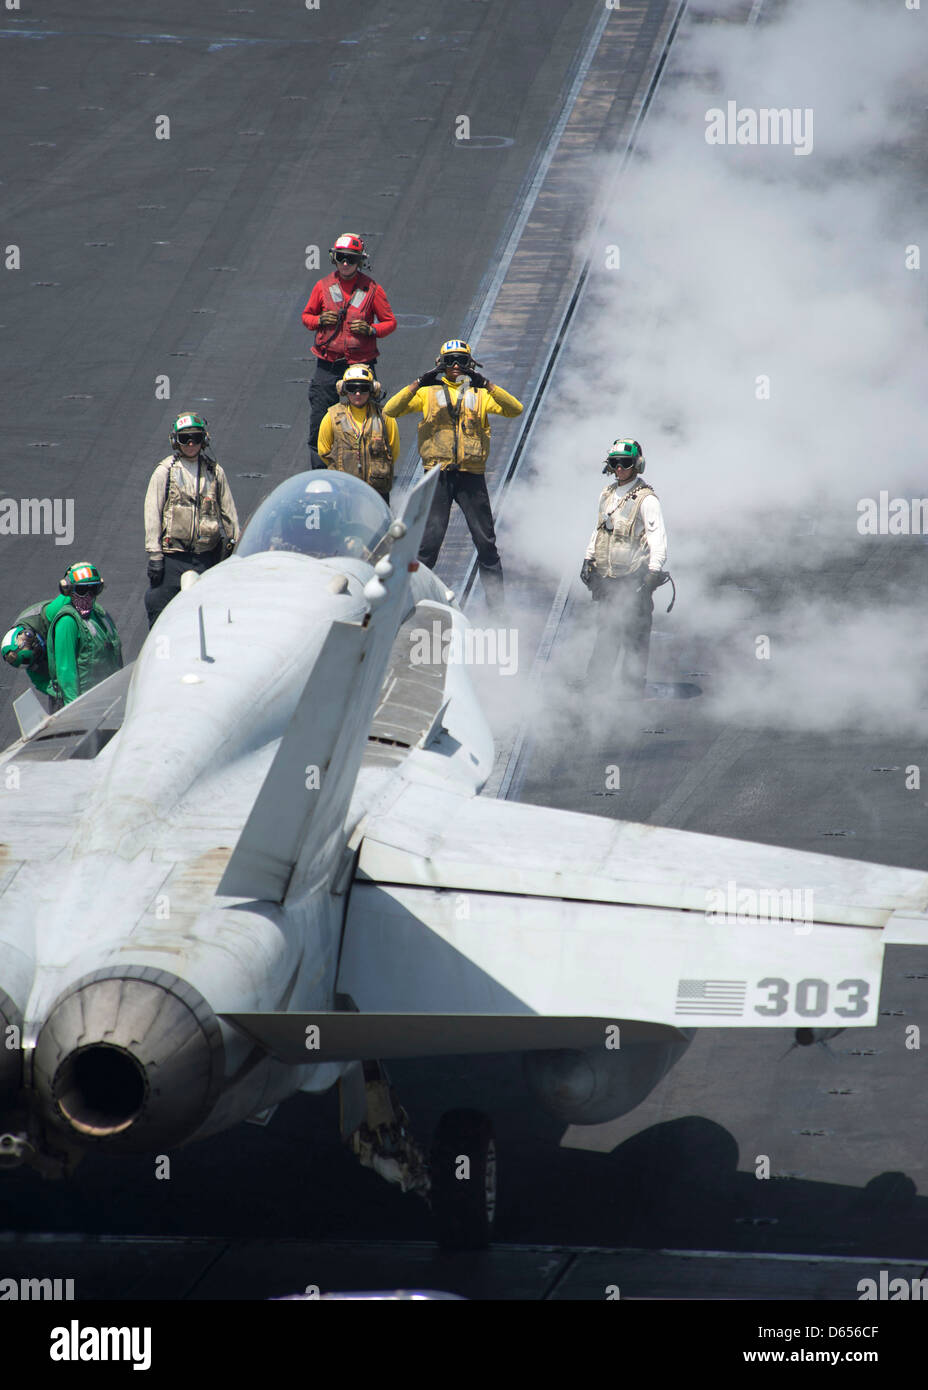 A US Navy plane director guides an F/A-18C Hornet onto a catapult for take off on the flight deck of aircraft carrier USS Dwight D. Eisenhower April 9, 201 in the North Arabian Sea. Stock Photo